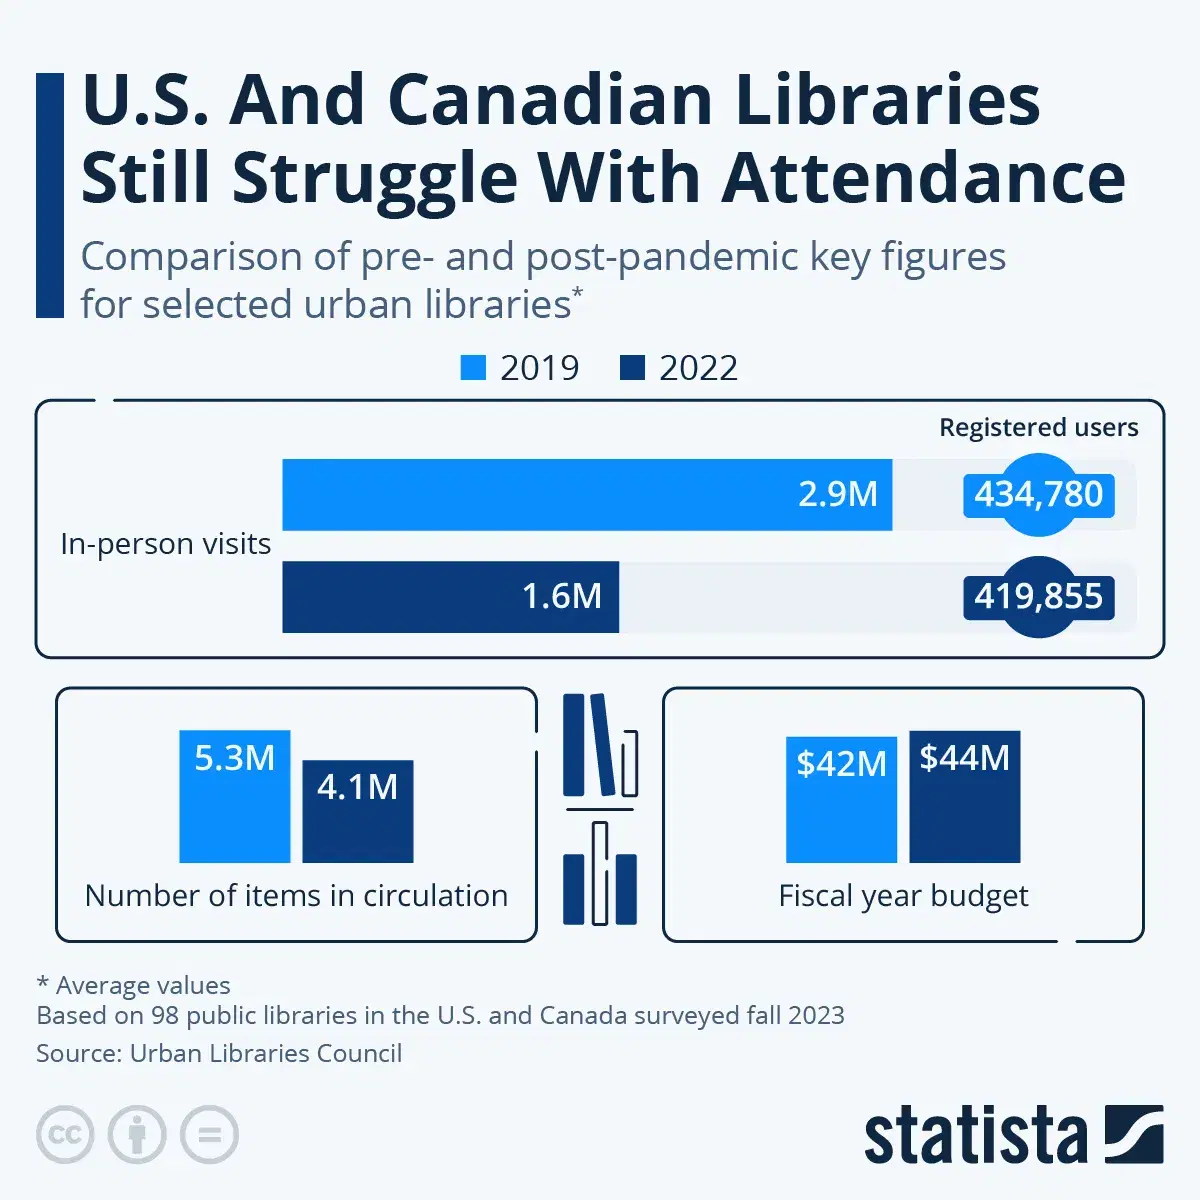 U.S. and Canadian Libraries Have Struggled With Post-Pandemic Attendance